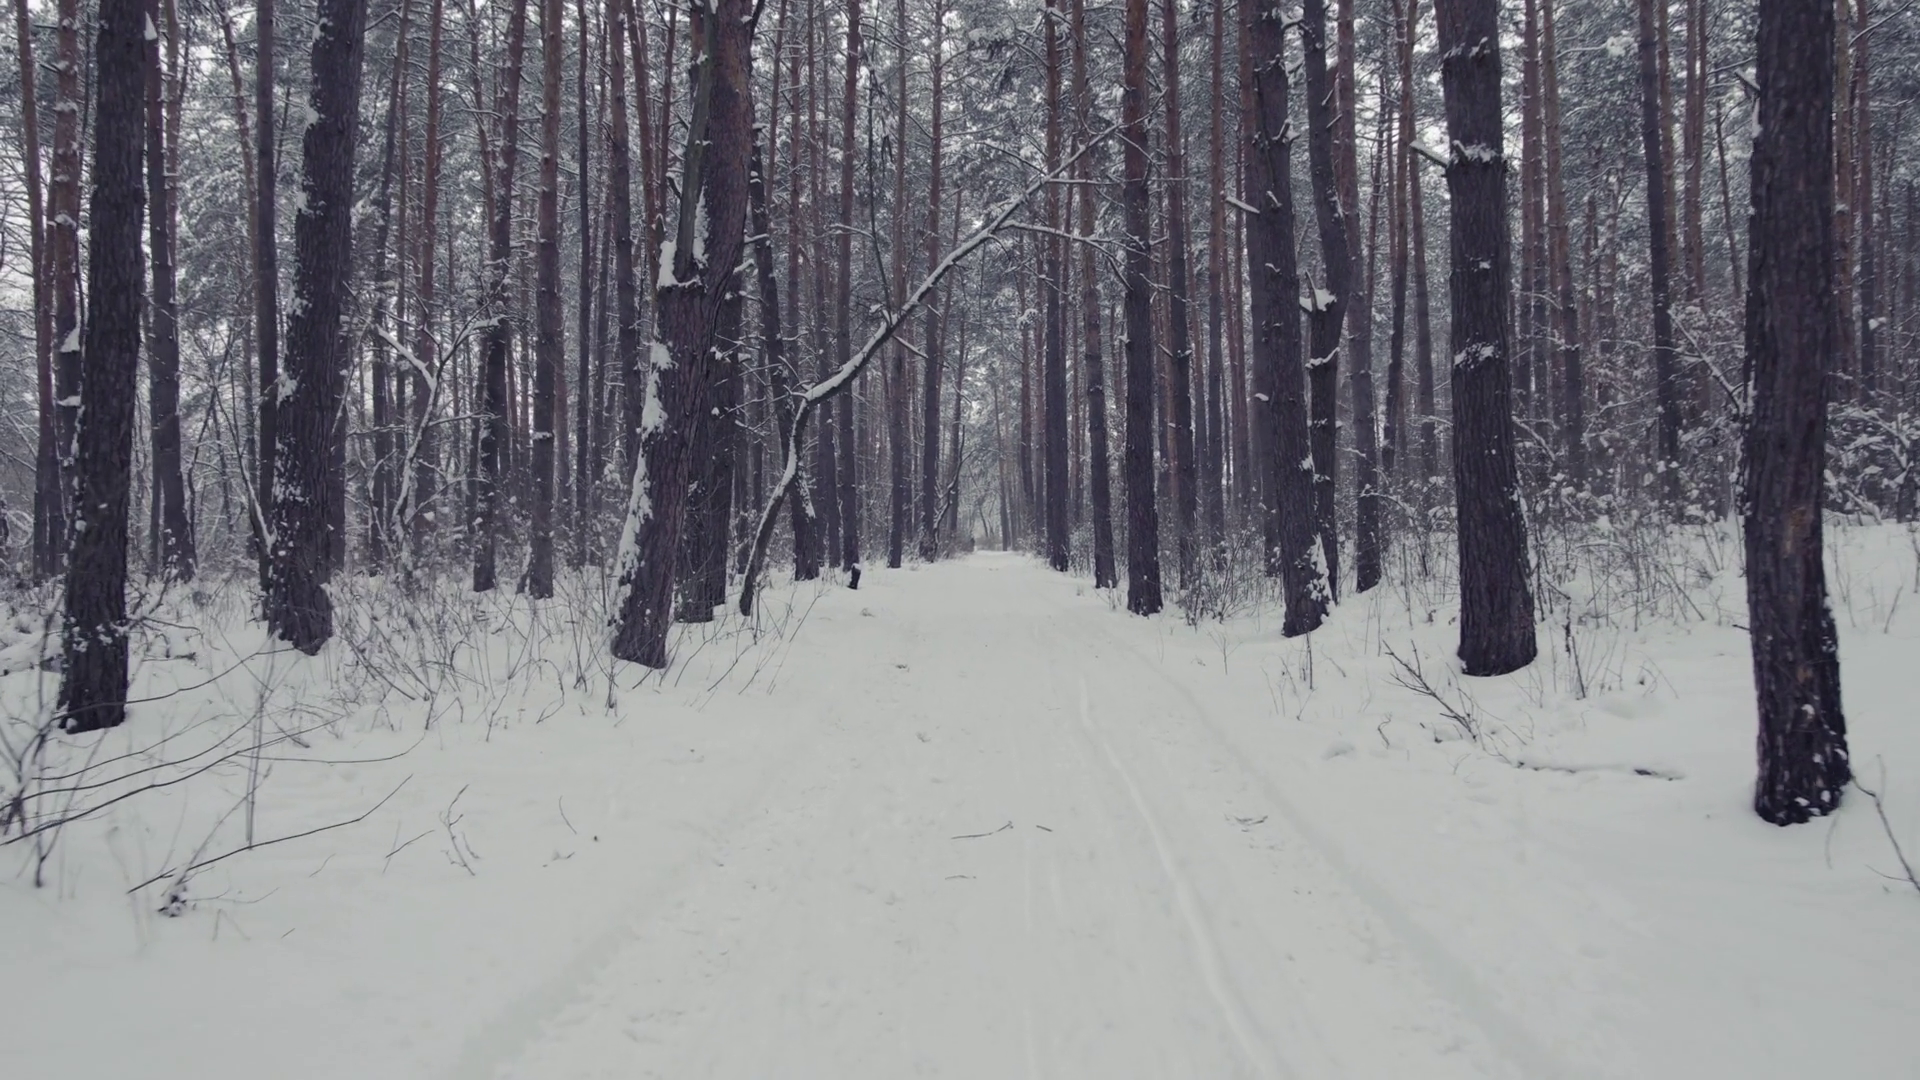 Walking in the Pine Wood on Snowy Path in Winter Stock Video Footage ...